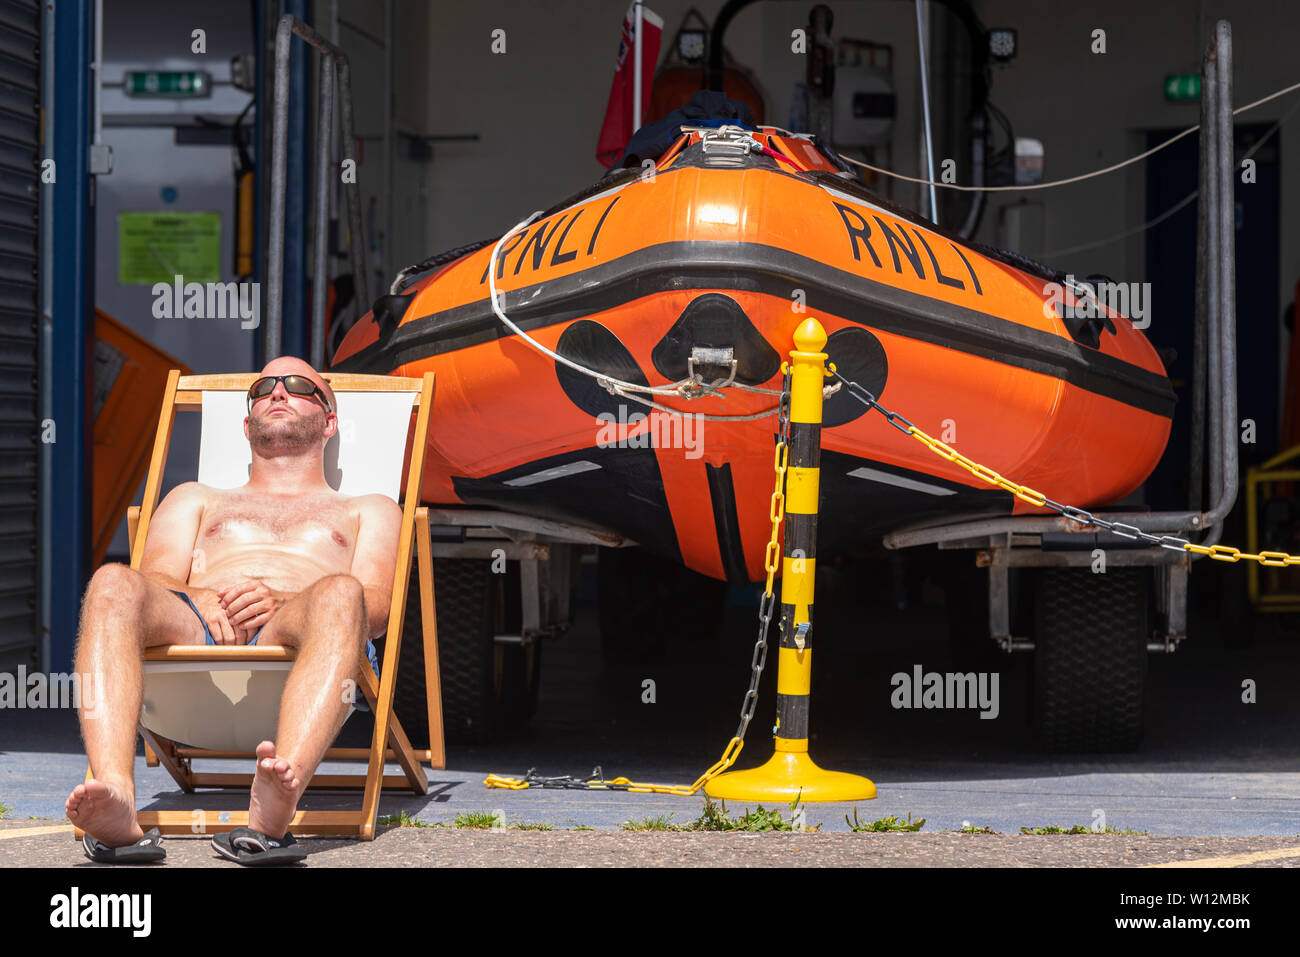 RNLI crew member Dave Cartwright sunbathing during a heatwave outside the boathouse at Southend on Sea, Essex, UK. D class inshore lifeboat Stock Photo